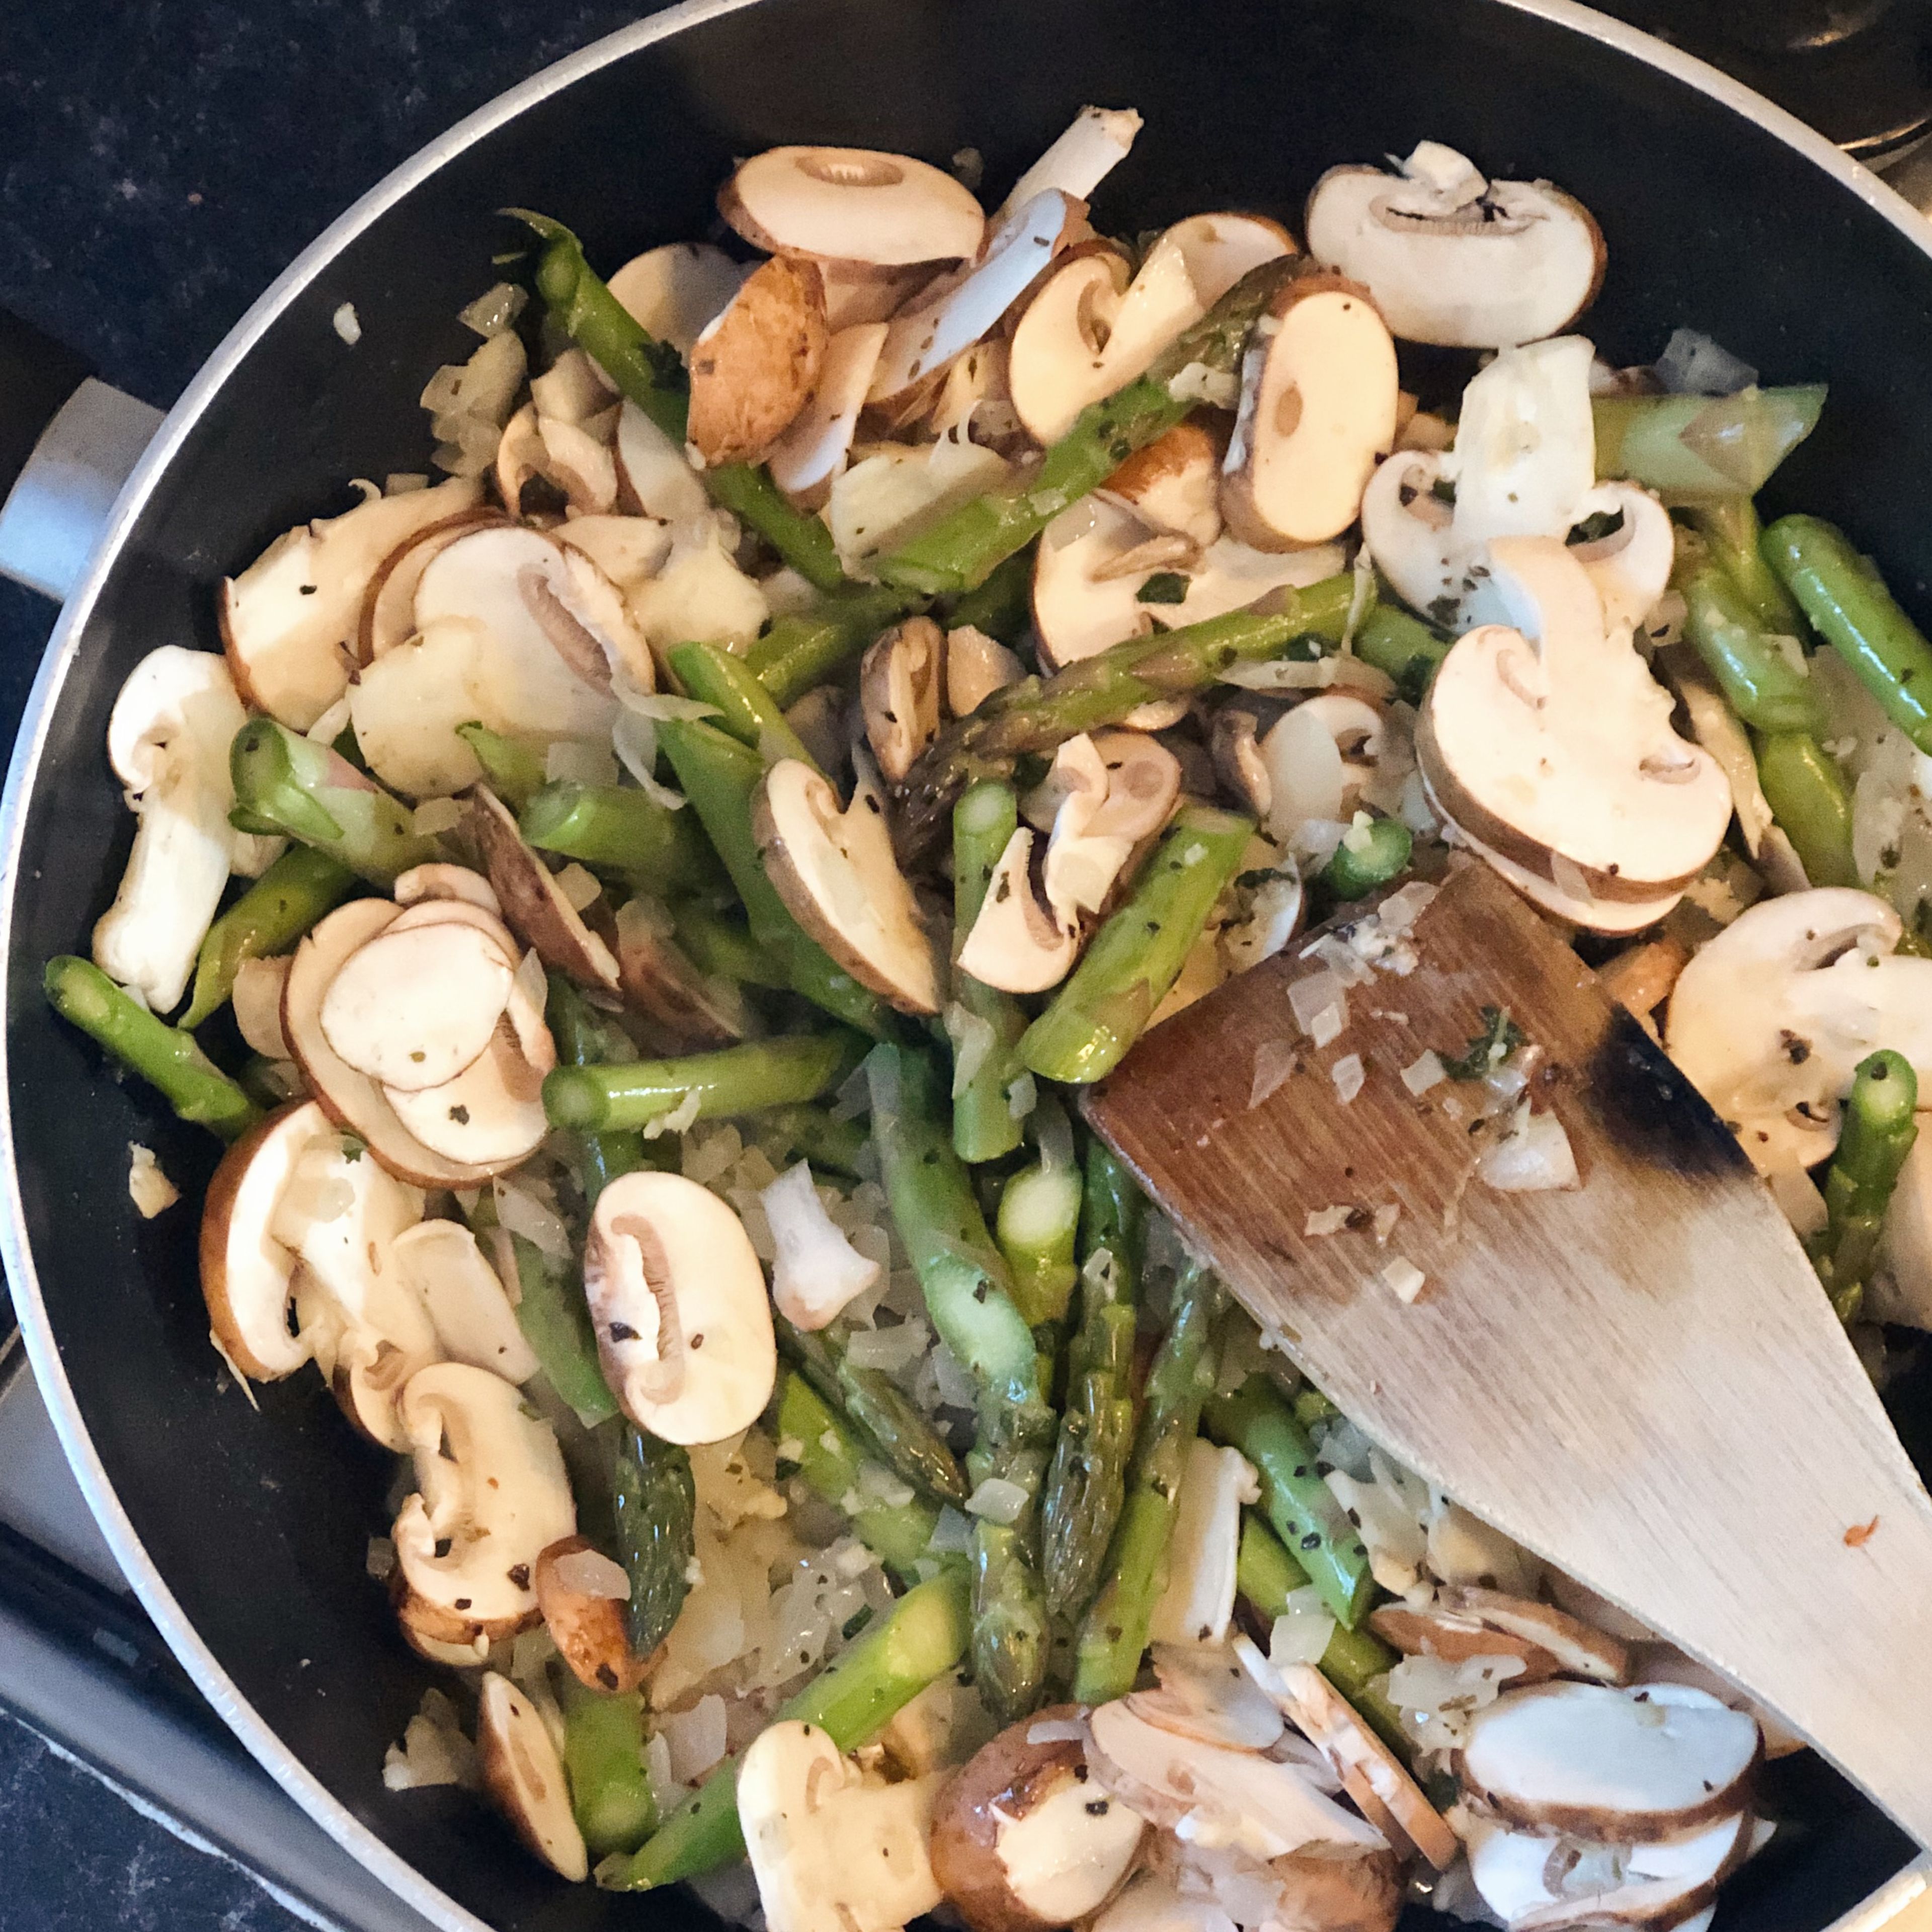 Add chopped mushrooms and asparagus to wok and fry on medium heat for 5 minutes.